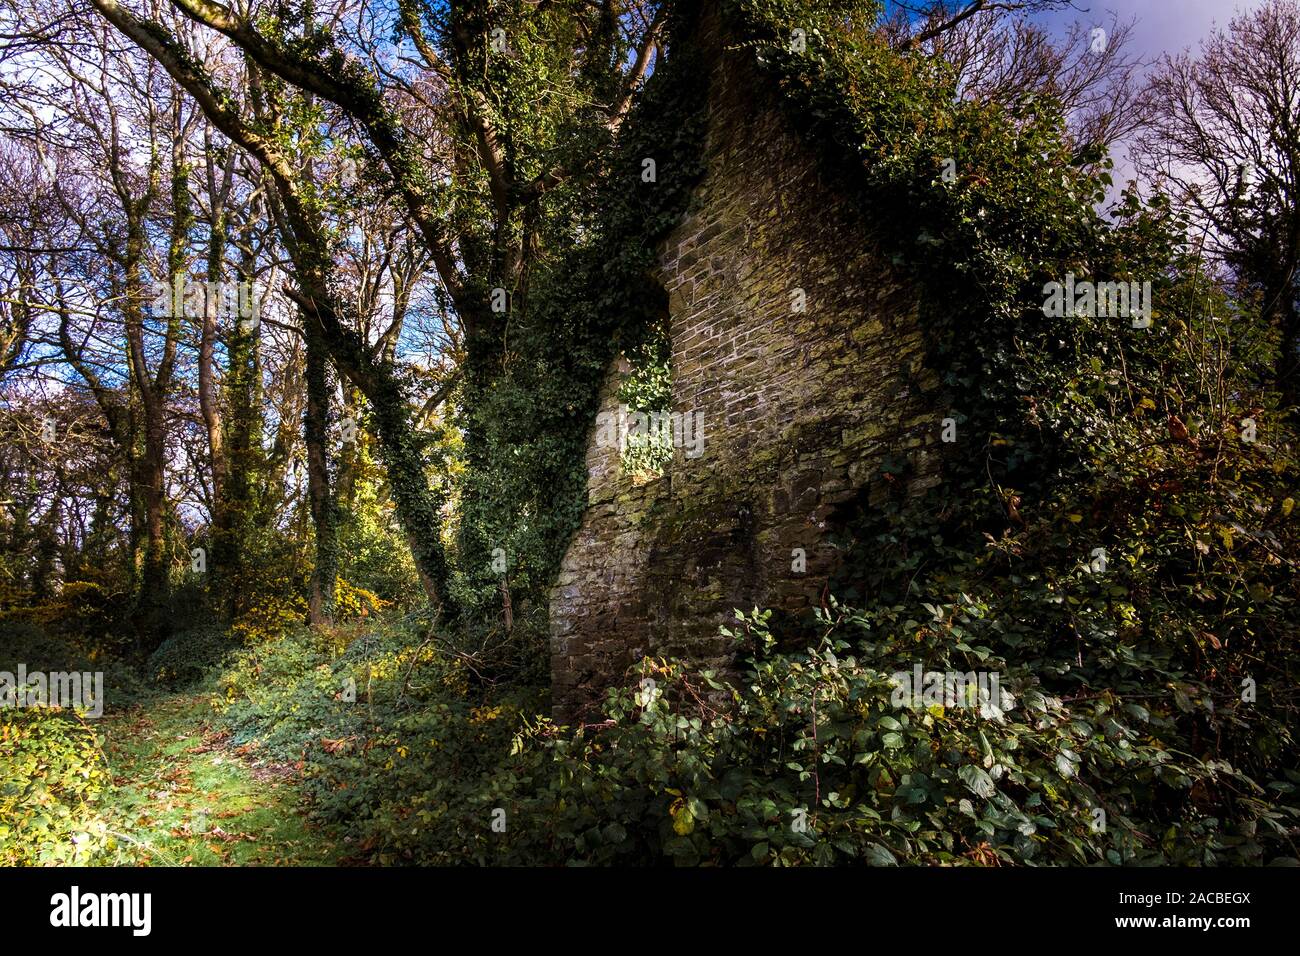 The remains of the Fir Hill Manor House in Colan Woods, the overgrown grounds of the historic Fir Hill Estate in Colan Parish in Newquay in Cornwall. Stock Photo